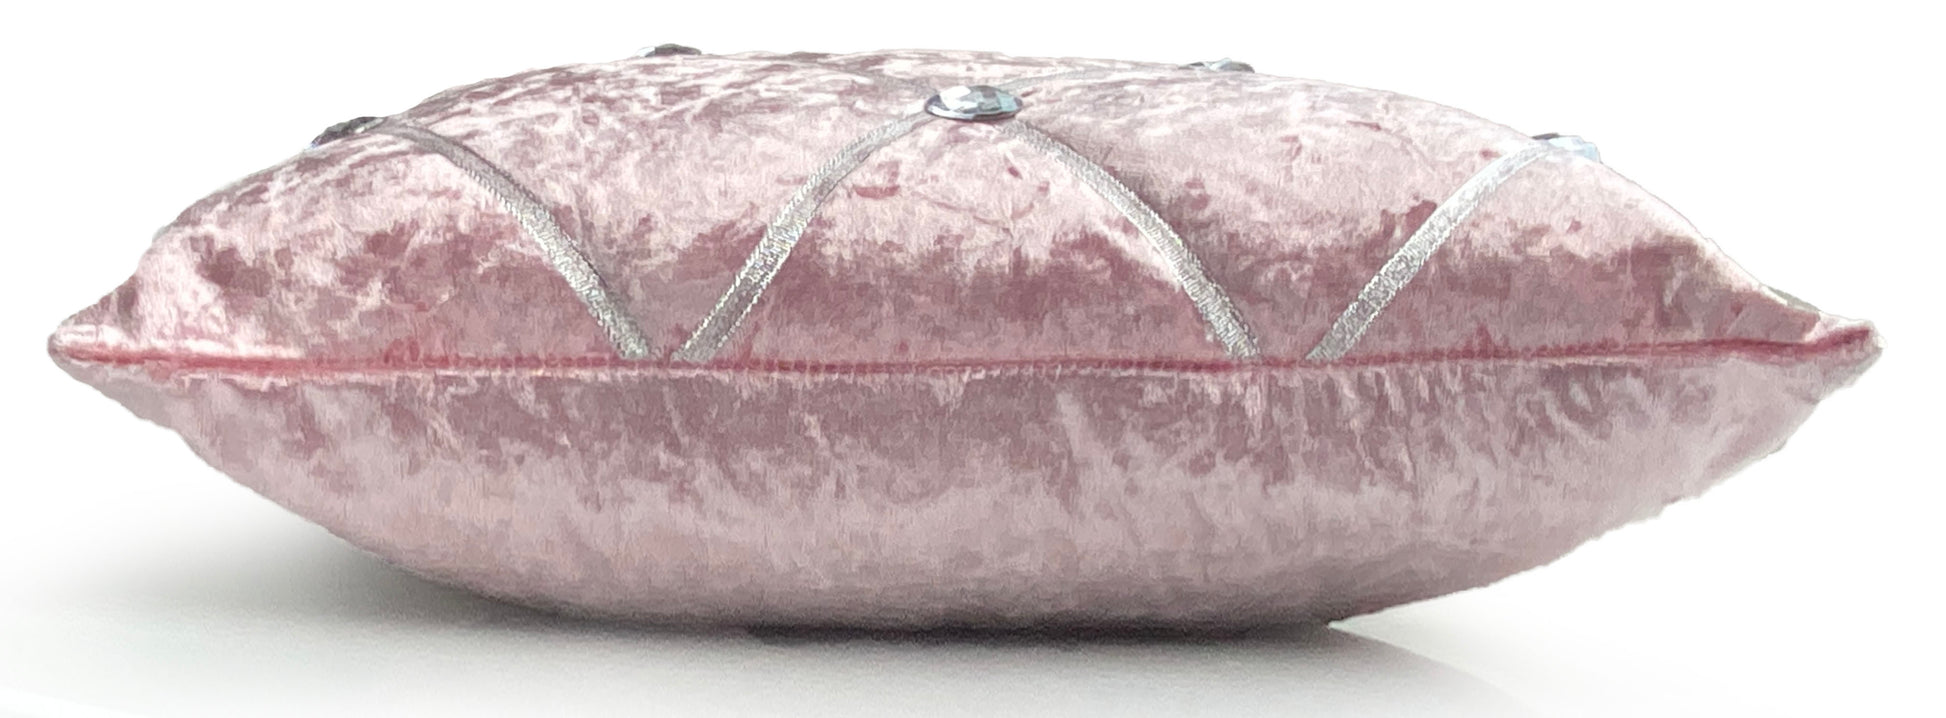 Large Crush Velvet Cushions or Covers Diamante Chesterfield 3 Sizes BLUSH PINK side view